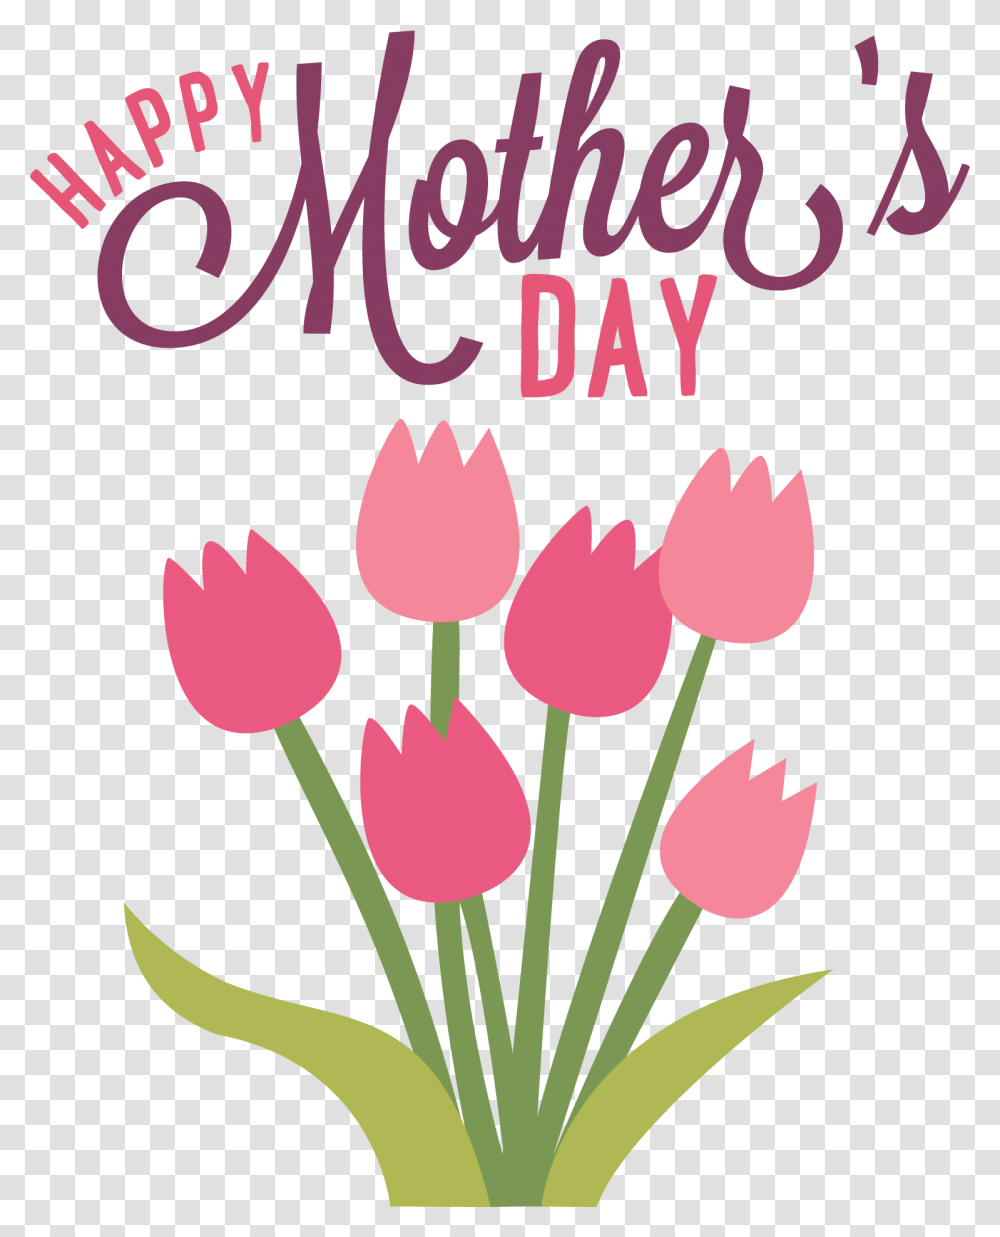 Happy Mothers Day Flowers Sticker, Plant, Floral Design Transparent Png